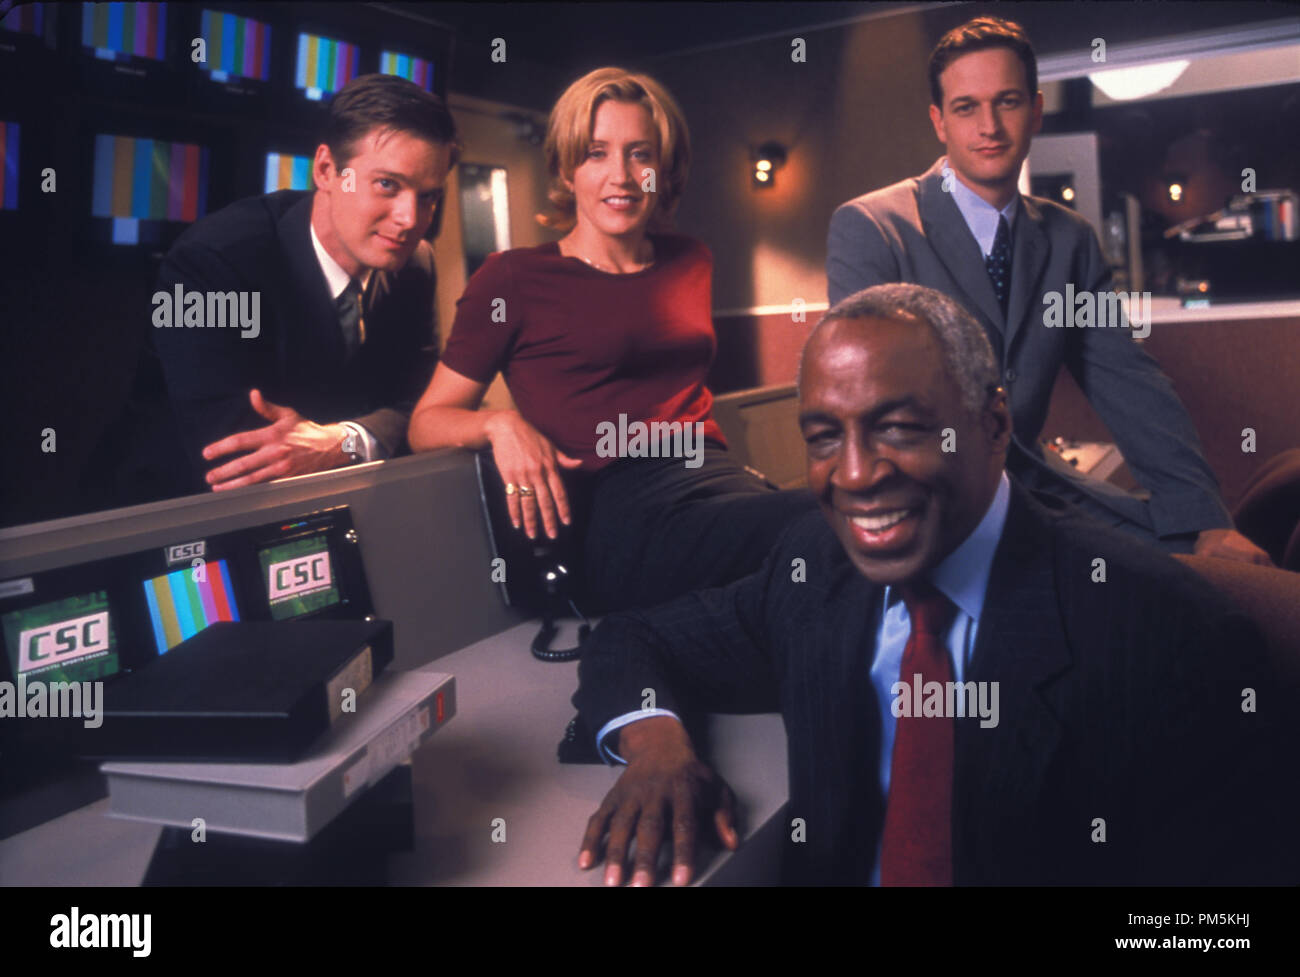 Film Still / Publicity Stills from 'Sports Night' Peter Krause, Felicity Huffman, Josh Charles,  Robert Guillaume 2000 ABC File Reference # 30846209THA  For Editorial Use Only -  All Rights Reserved Stock Photo